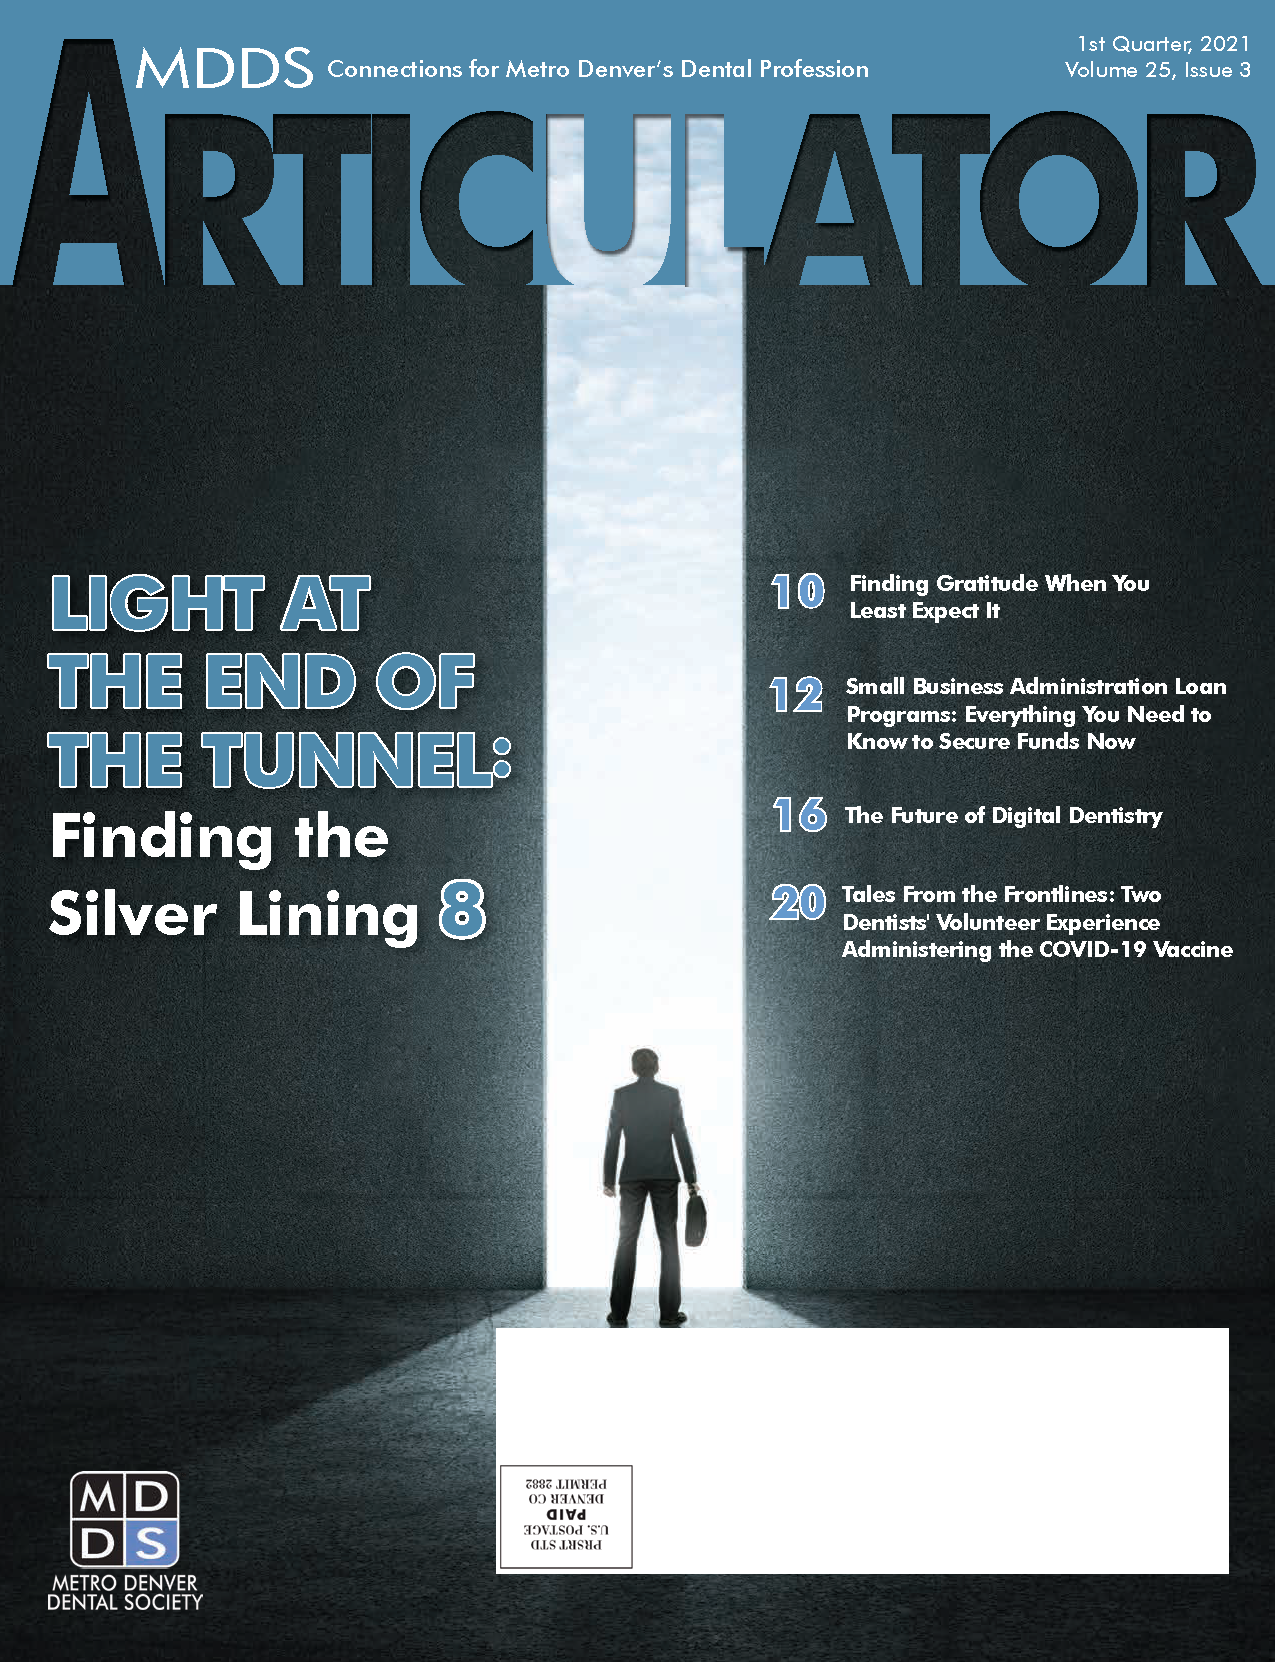 Cover of the Metro Denver Dental Society's Articulator magazine with image of a person in a suit carrying a briefcase standing in front of a brightly lit entrance between two tall walls.